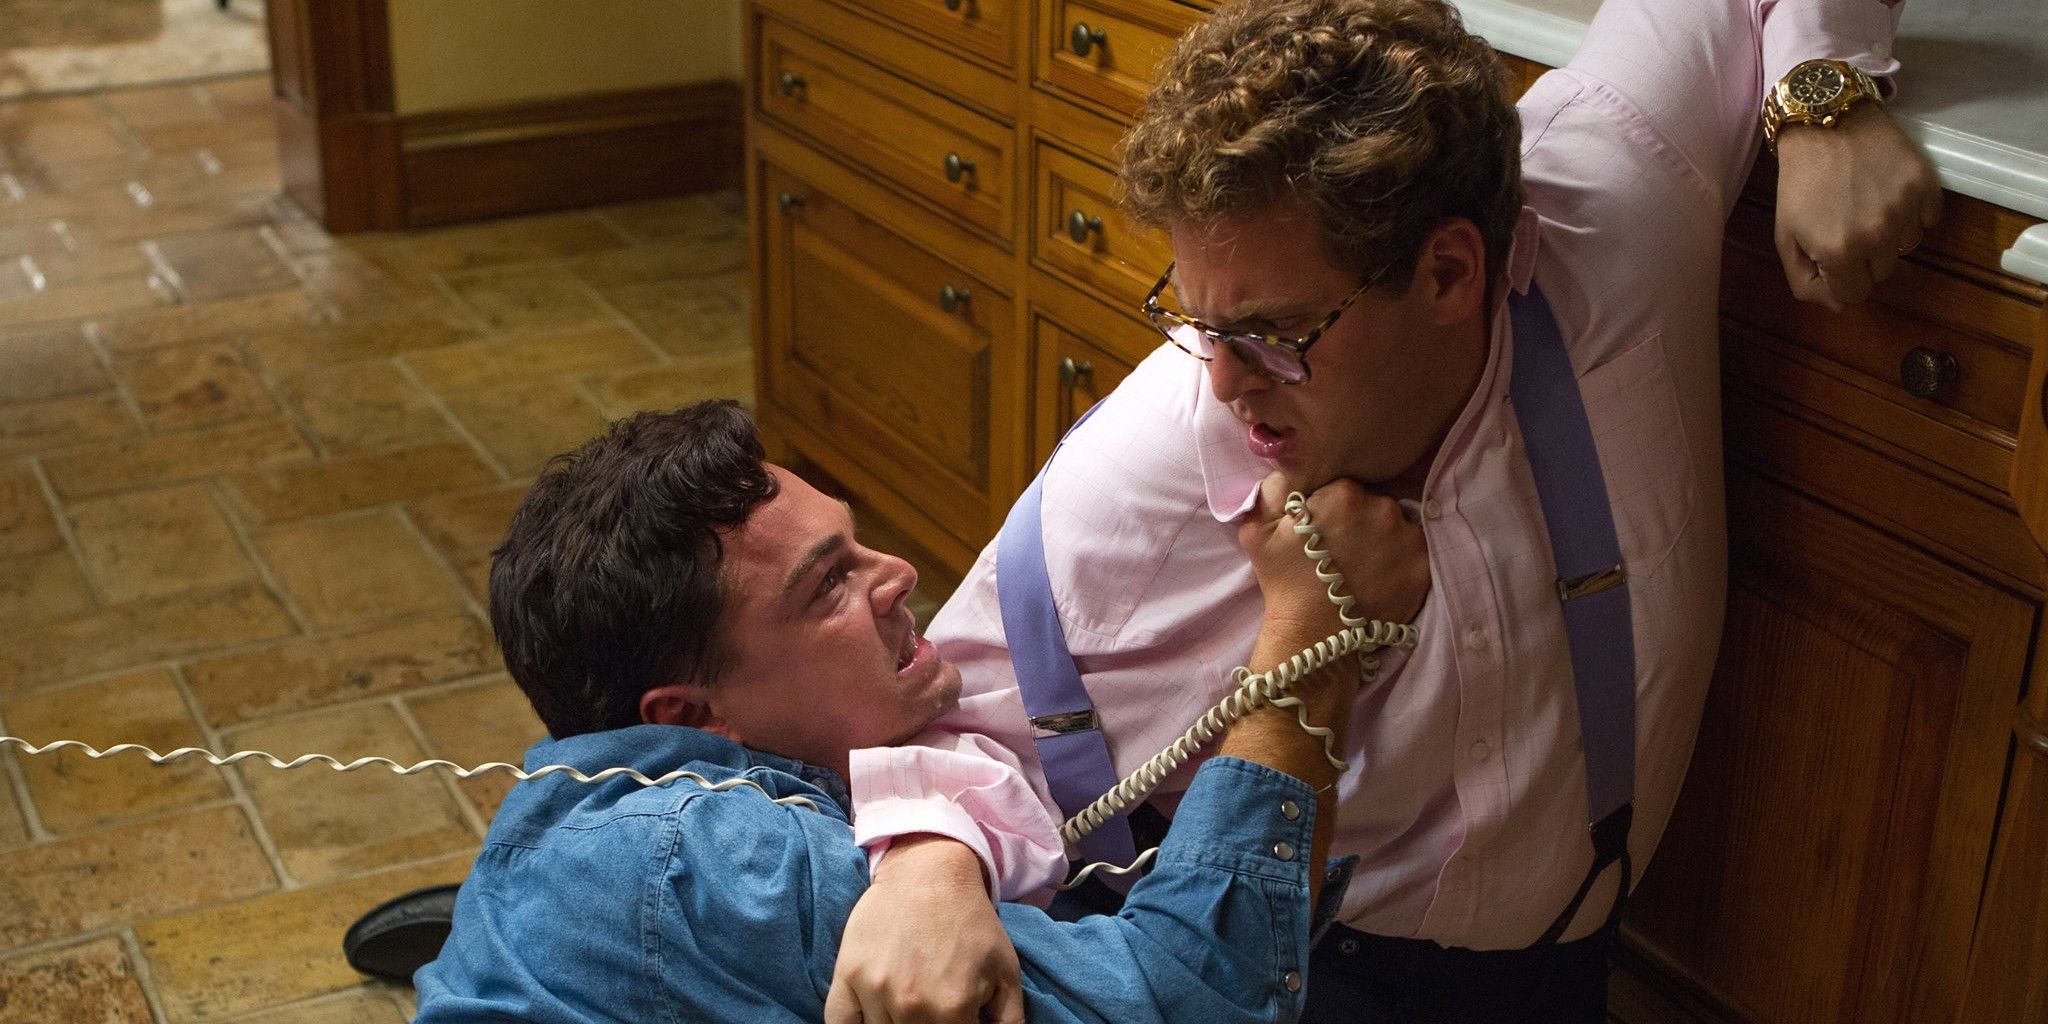 The 5 Best Music Moments In The Departed (& 5 In The Wolf Of Wall Street)